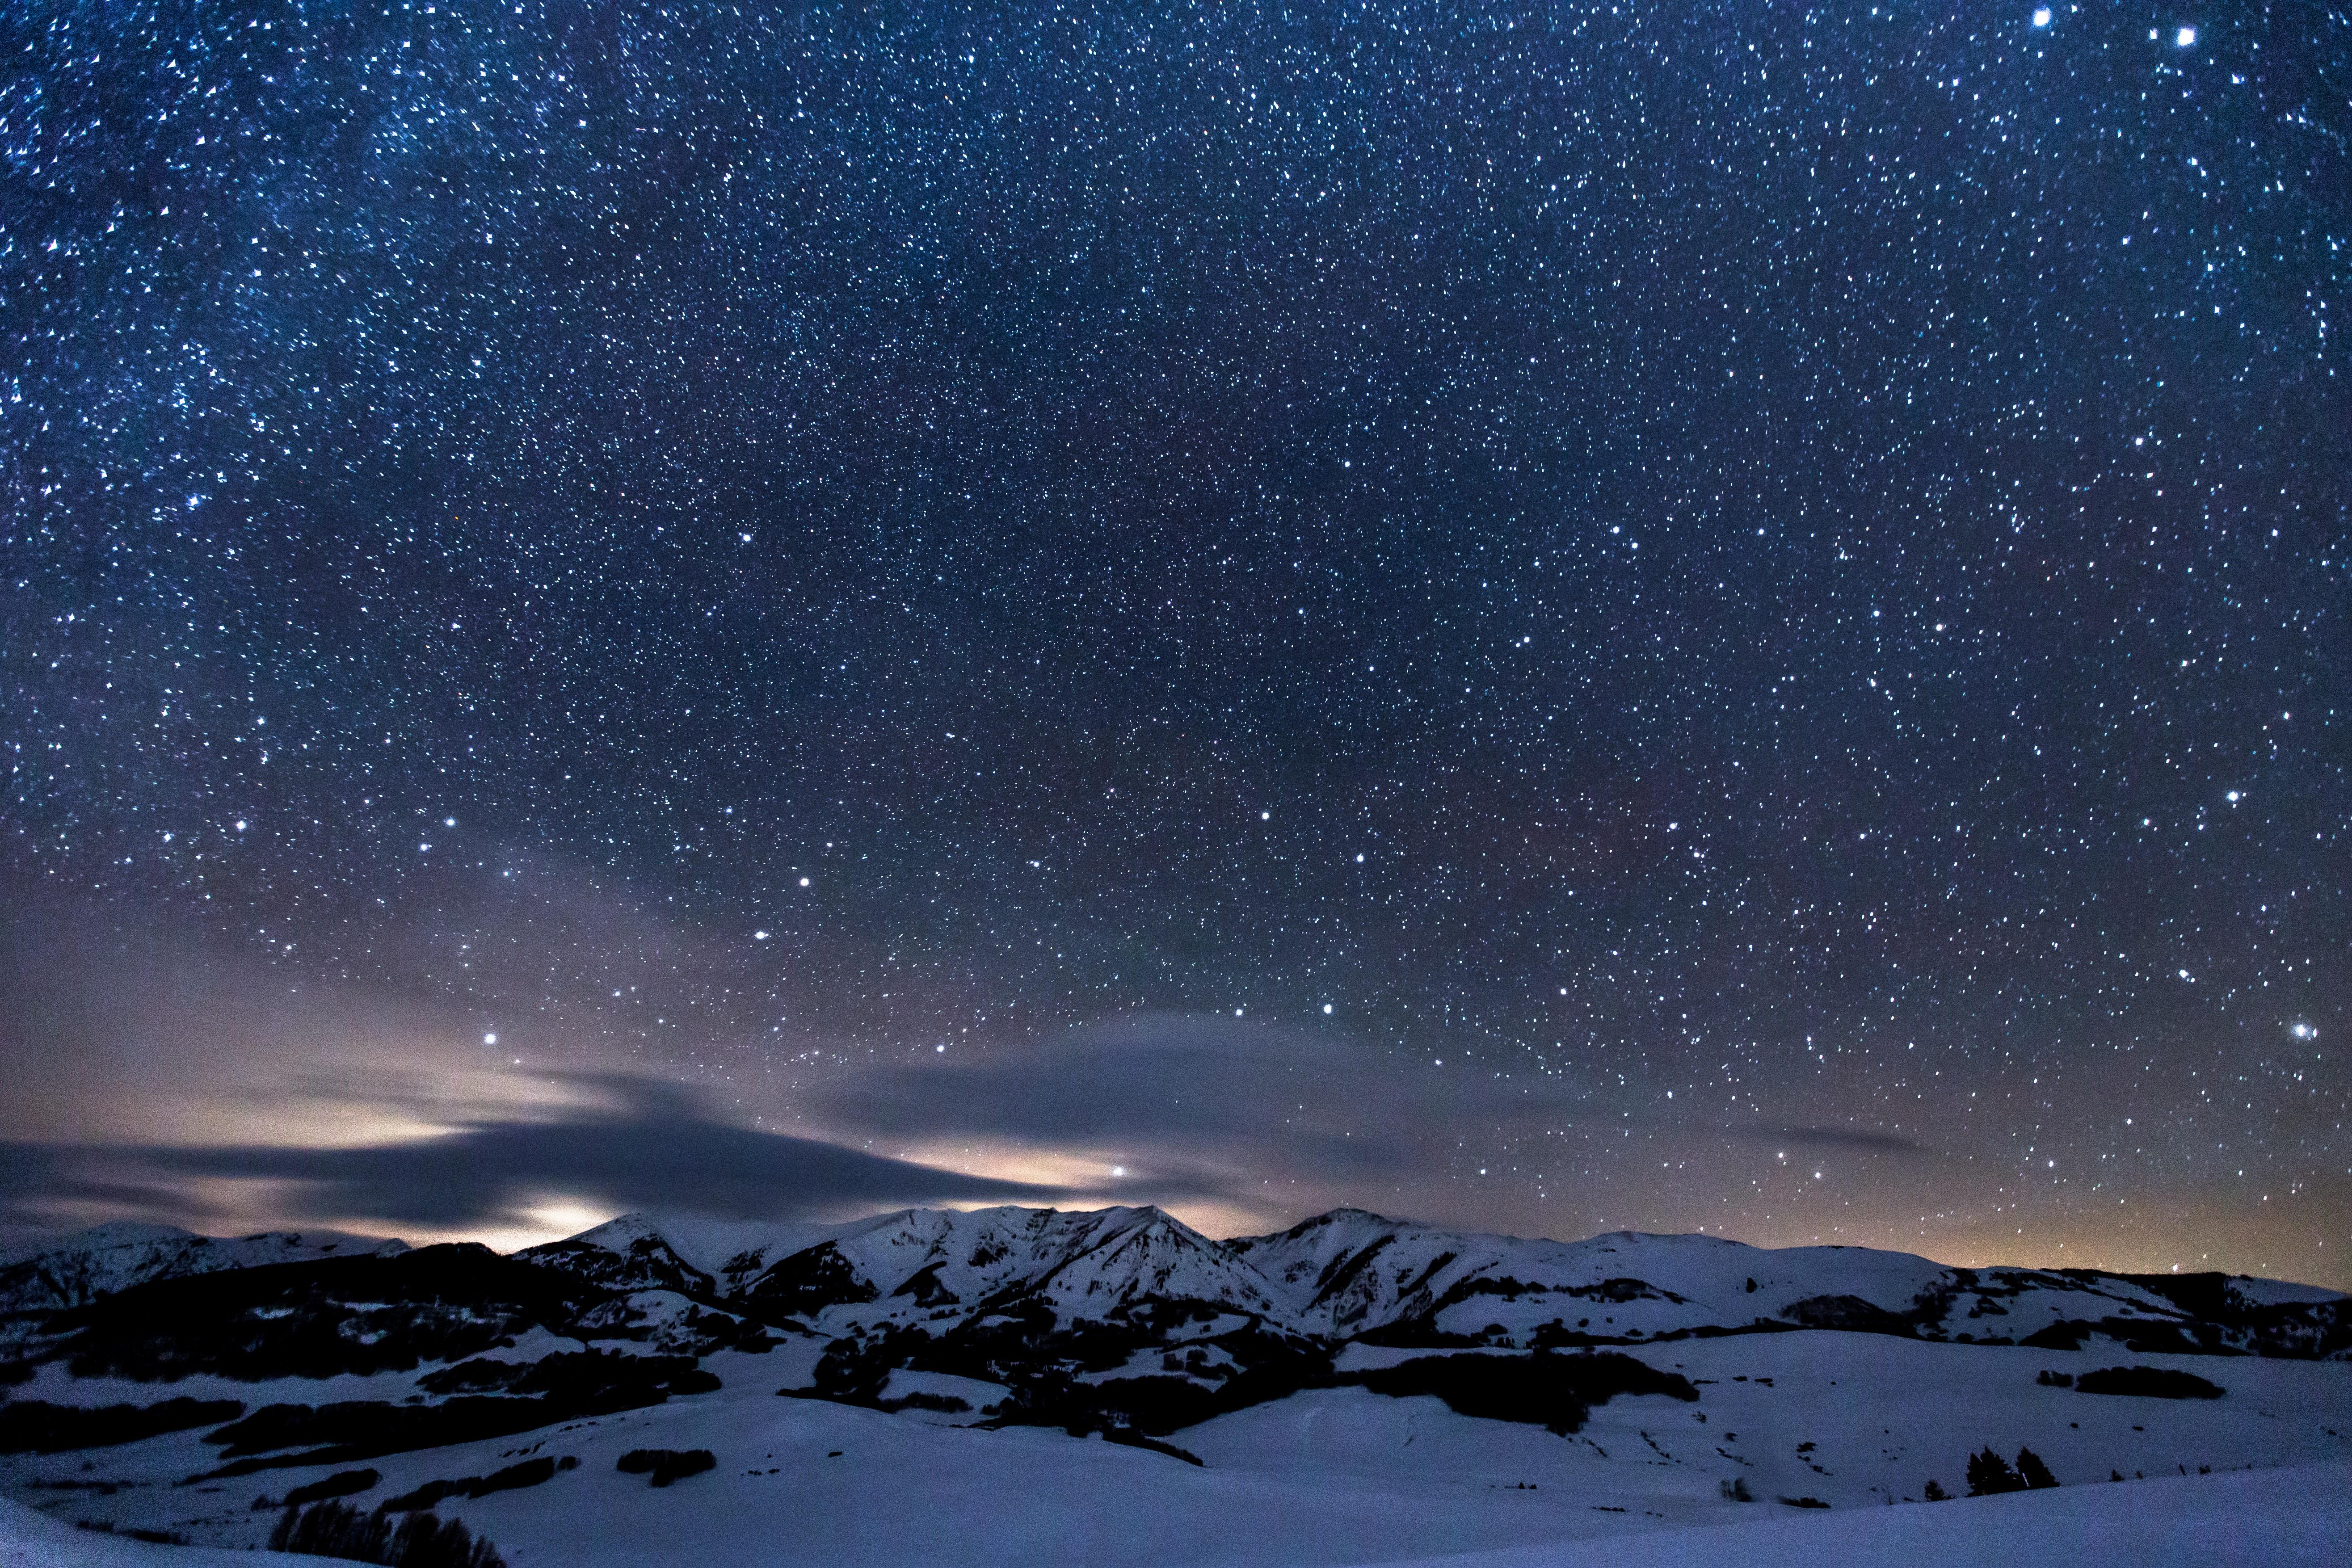 5263x3509 #tumblr, #cloud, #landscape, #night, #night sky, #star, # winter, #hill, #hillside, #cool background, #mountain, #night landscape, #cool wallpaper, #winter landscape, #wallpaper, #snowcapped, #Free image, #starry sky, #snow